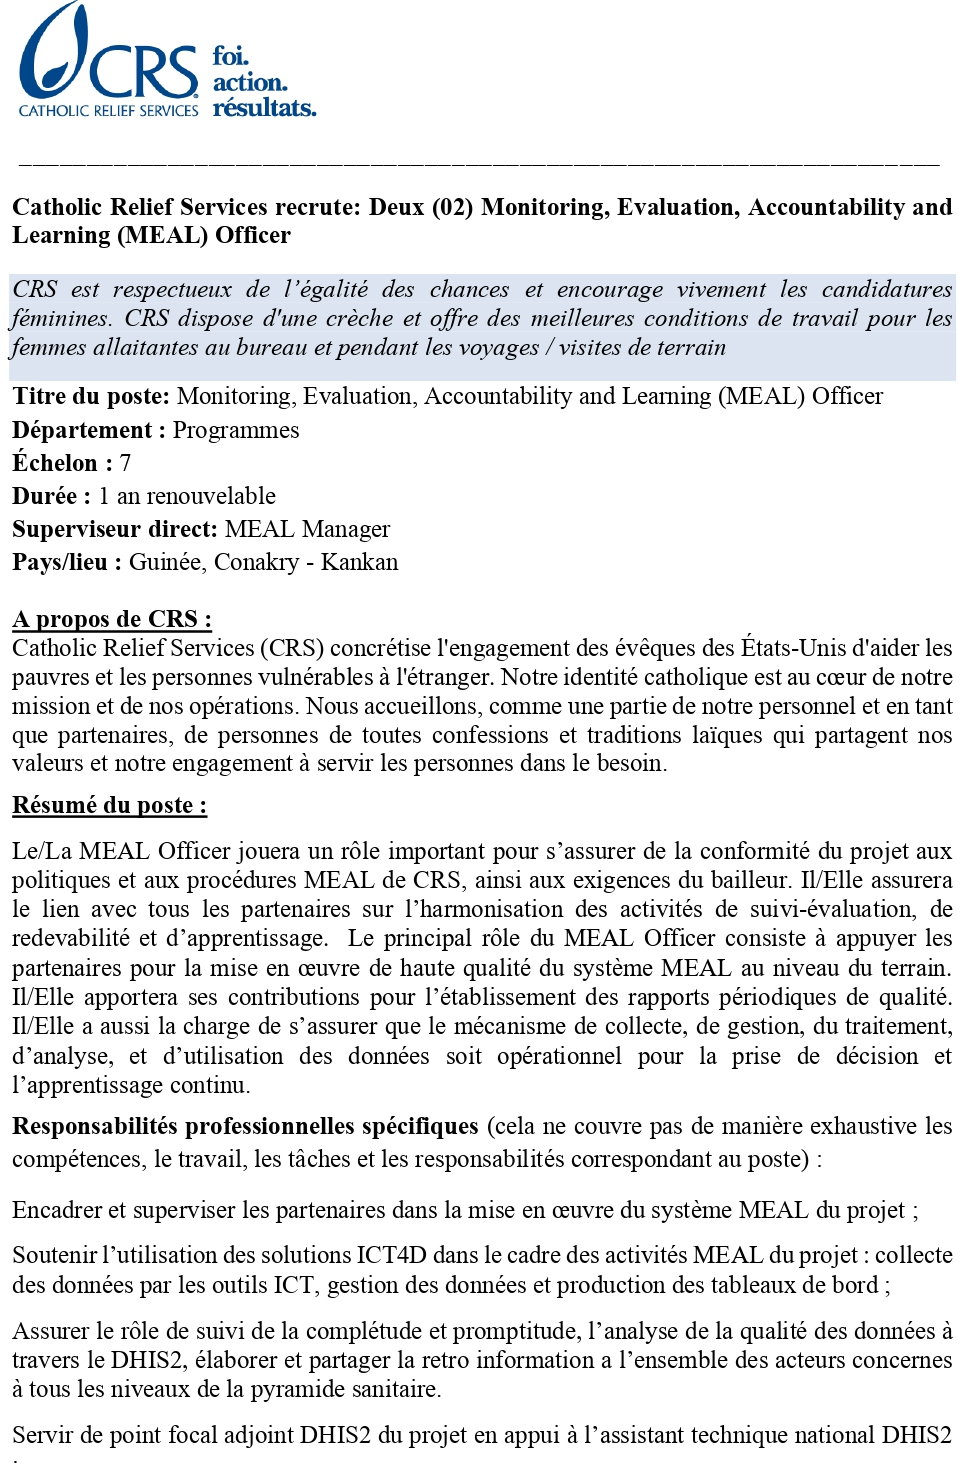 Deux (02) Monitoring, Evaluation, Accountability and Learning (MEAL) Officer | page 1